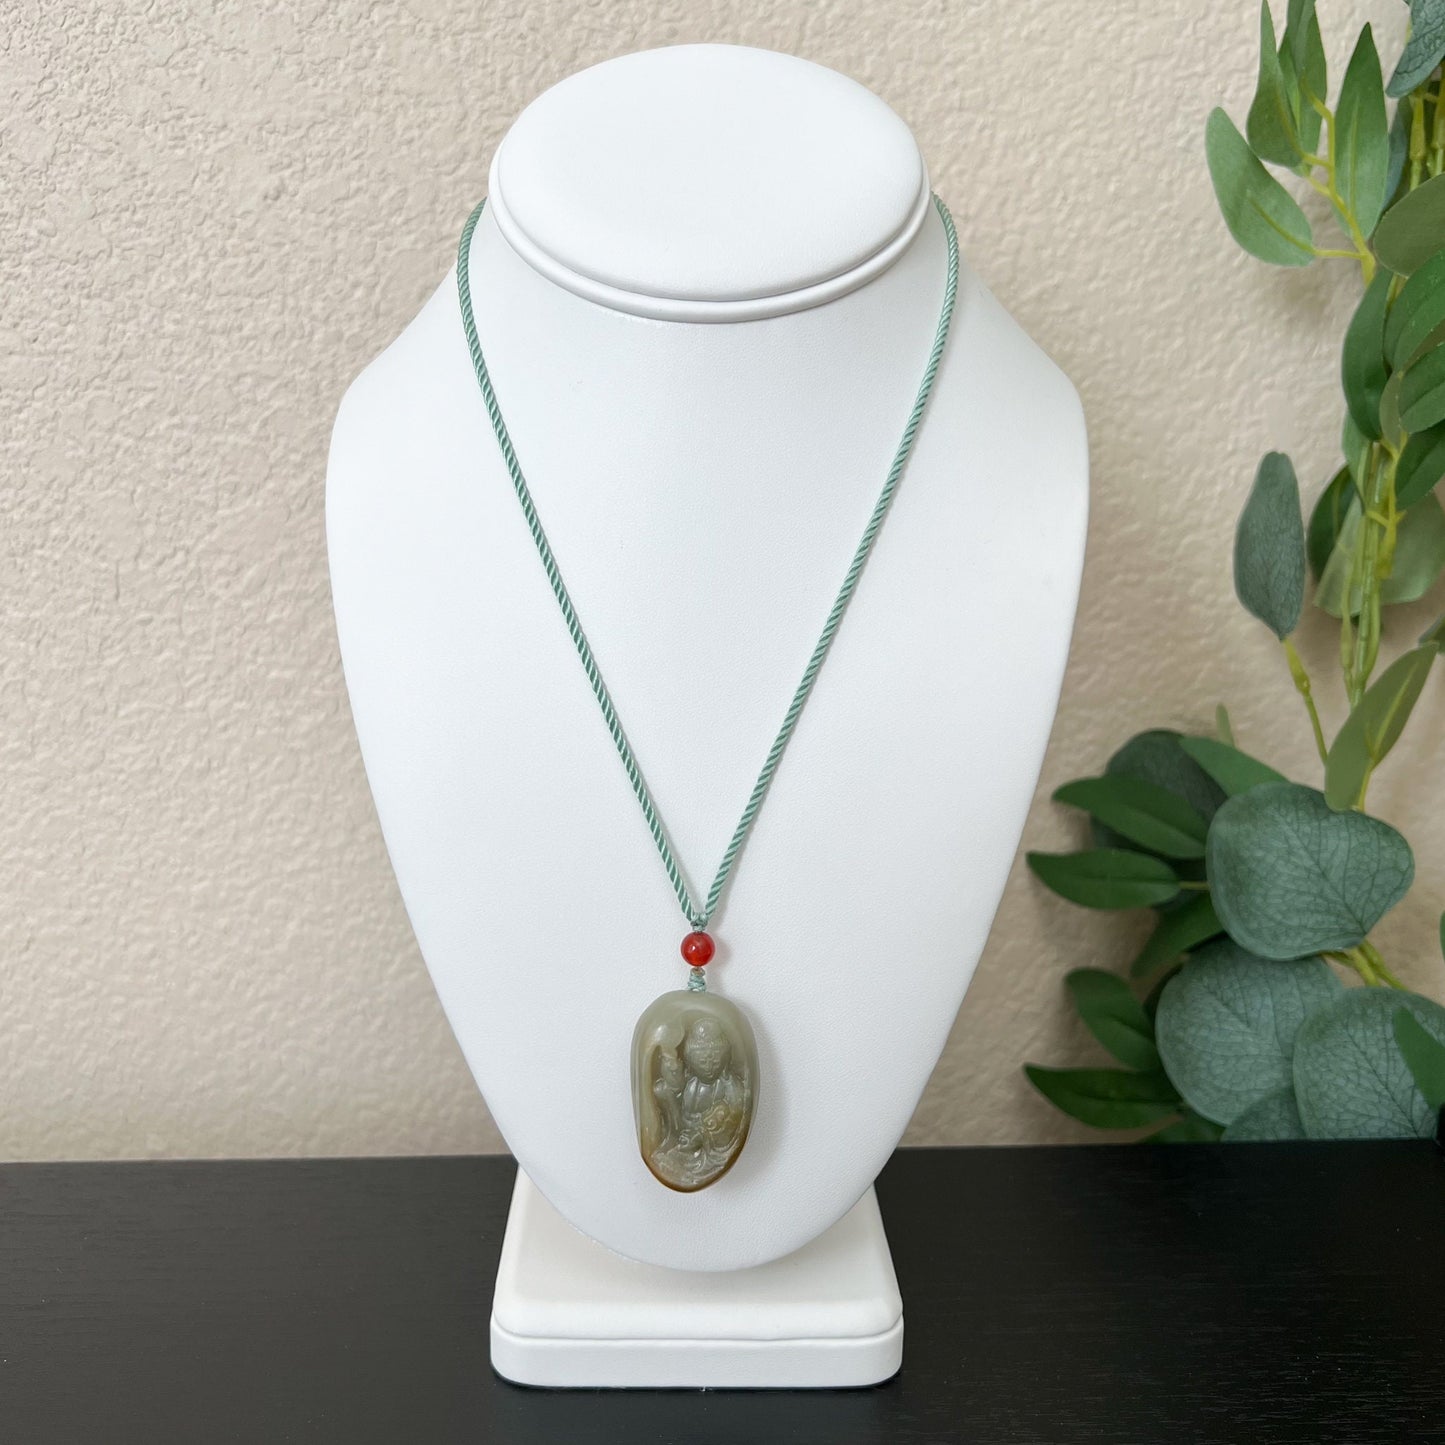 Yellow Red Nephrite Jade Guan Yin Necklace, Hand Carved, Pendant, Quan Am, YW-0110-1647116068 - AriaDesignCollection